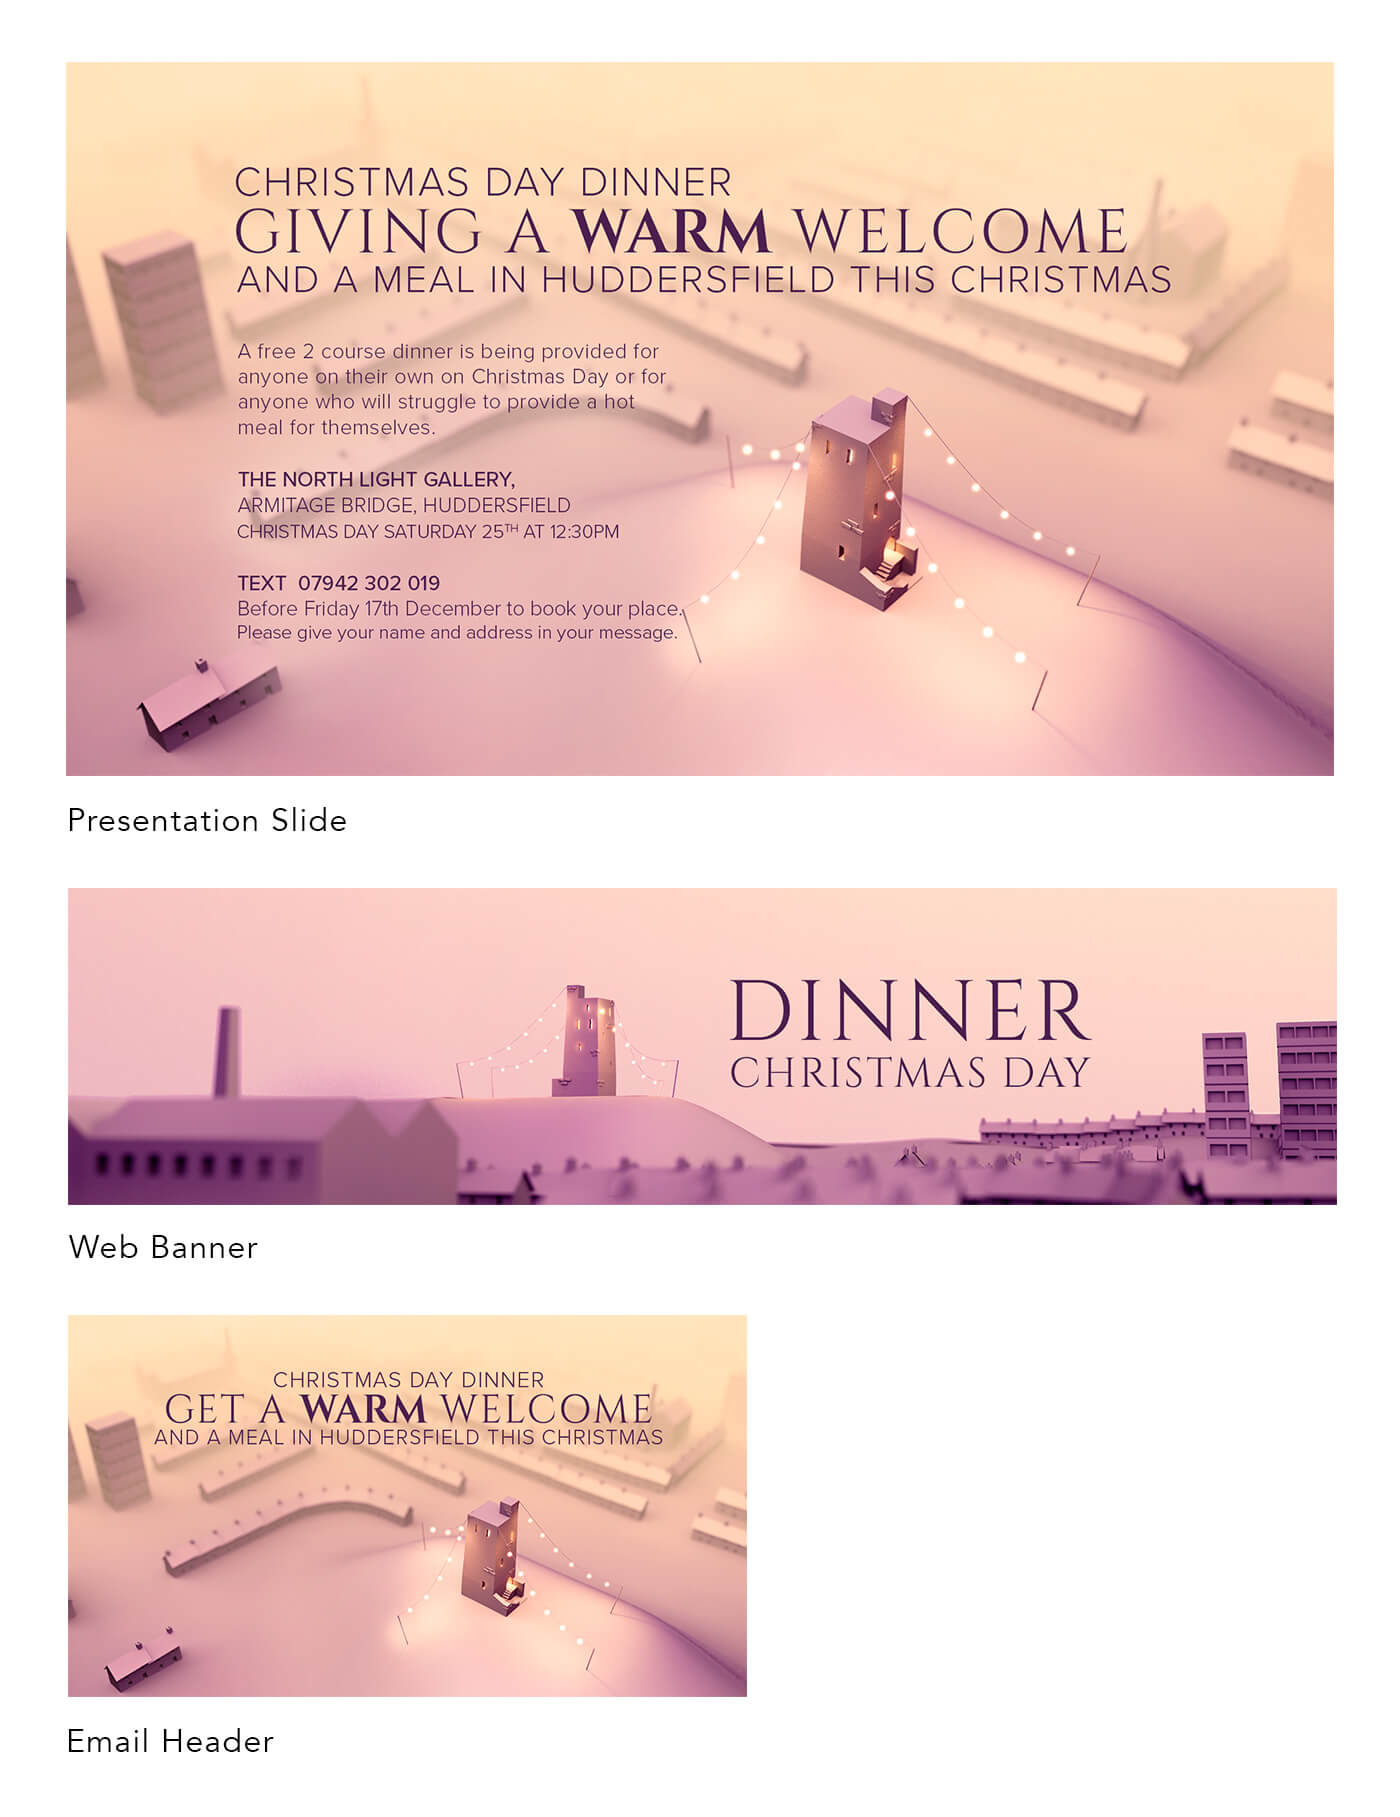 Digital assets created for Christmas campaign